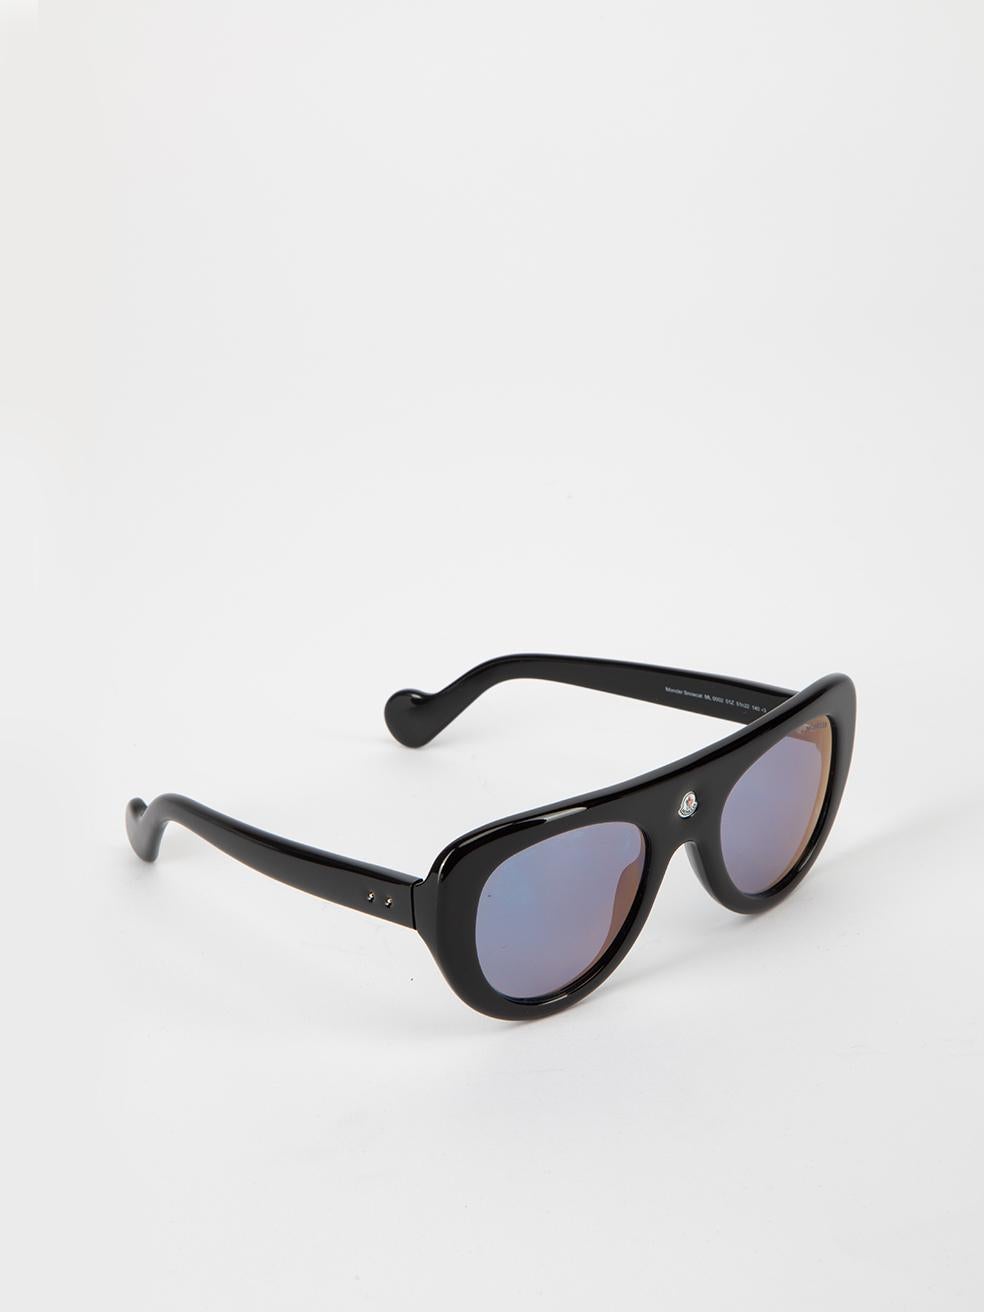 CONDITION is Very good. Minimal wear to sunglasses is evident. Minimal wear to the frame which is lightly scuffed on this used Moncler designer resale item. This item comes with original sunglasses case.   Details  Black Acetate Sunglasses Round